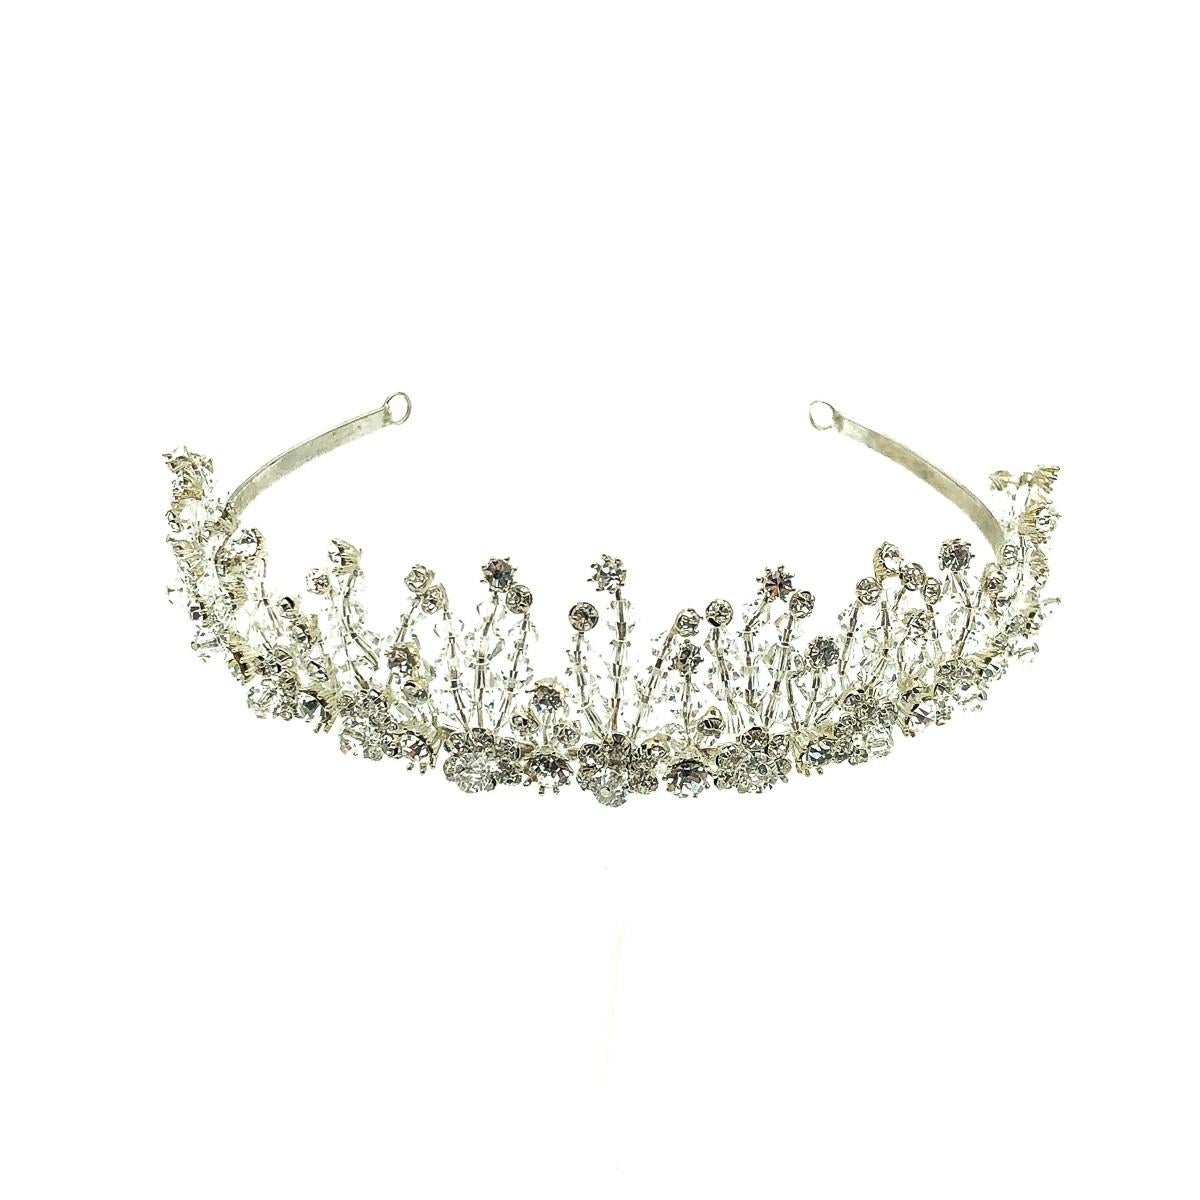 A beautiful Vintage Silver & Crystal Garden Tiara from the 1980s. Crafted in silver tone metal, faceted crystal beads and glass crystal chaton stones. Named the Garden Tiara by us as each line of drilled crystal beads, finished with crystal chaton